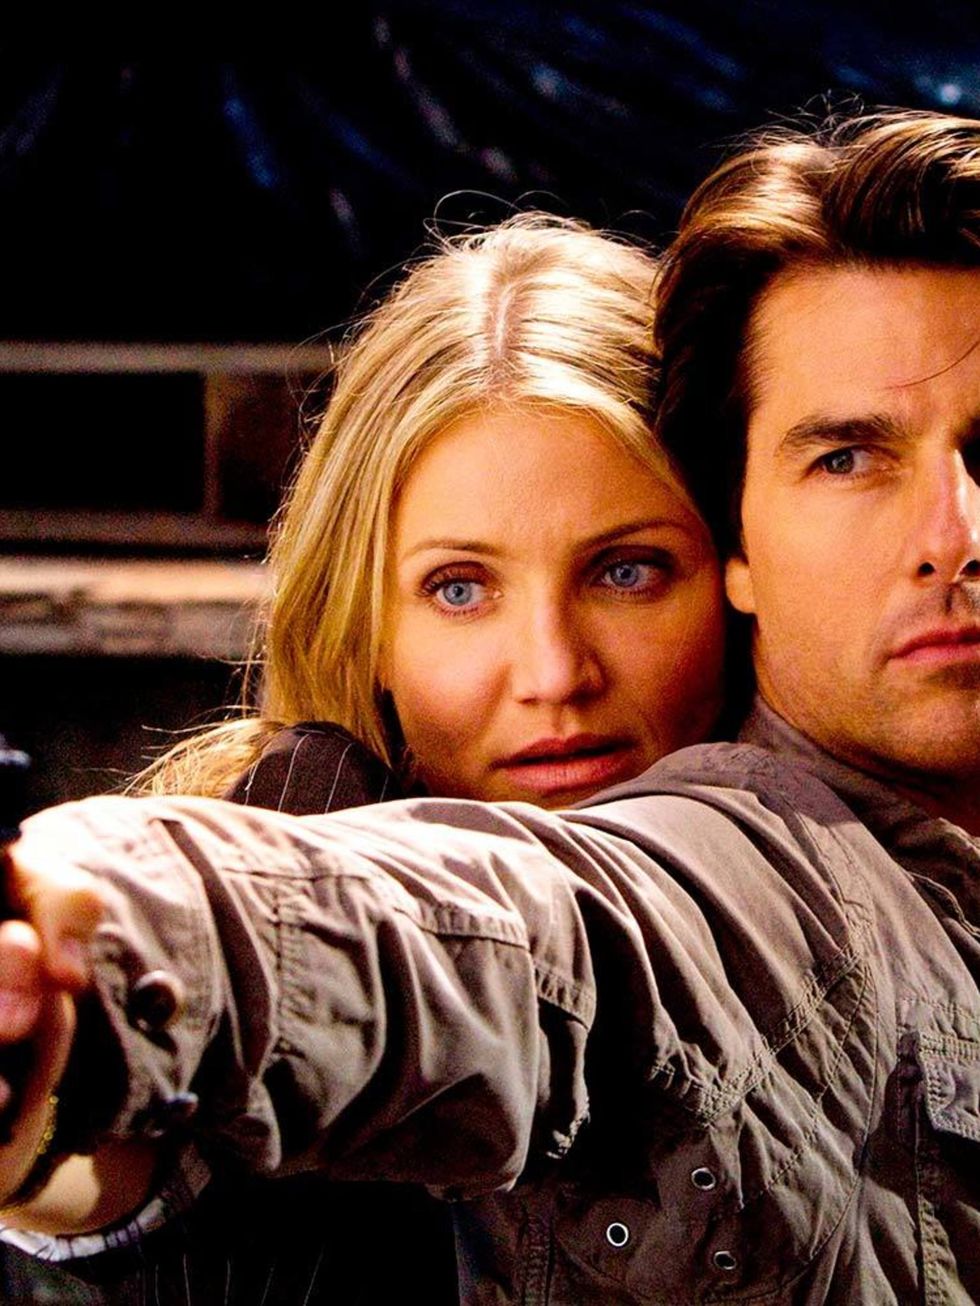 <p><strong>Cameron Diaz and Tom Cruise</strong></p>

<p>Cameron Crowe-directed <em>Vanilla Sky</em> first saw the stars join with Cam Diazs on-screen unrequited pursuit of Tom Cruise. Eight years later, the pair headed up action flick <em>Knight and Day<